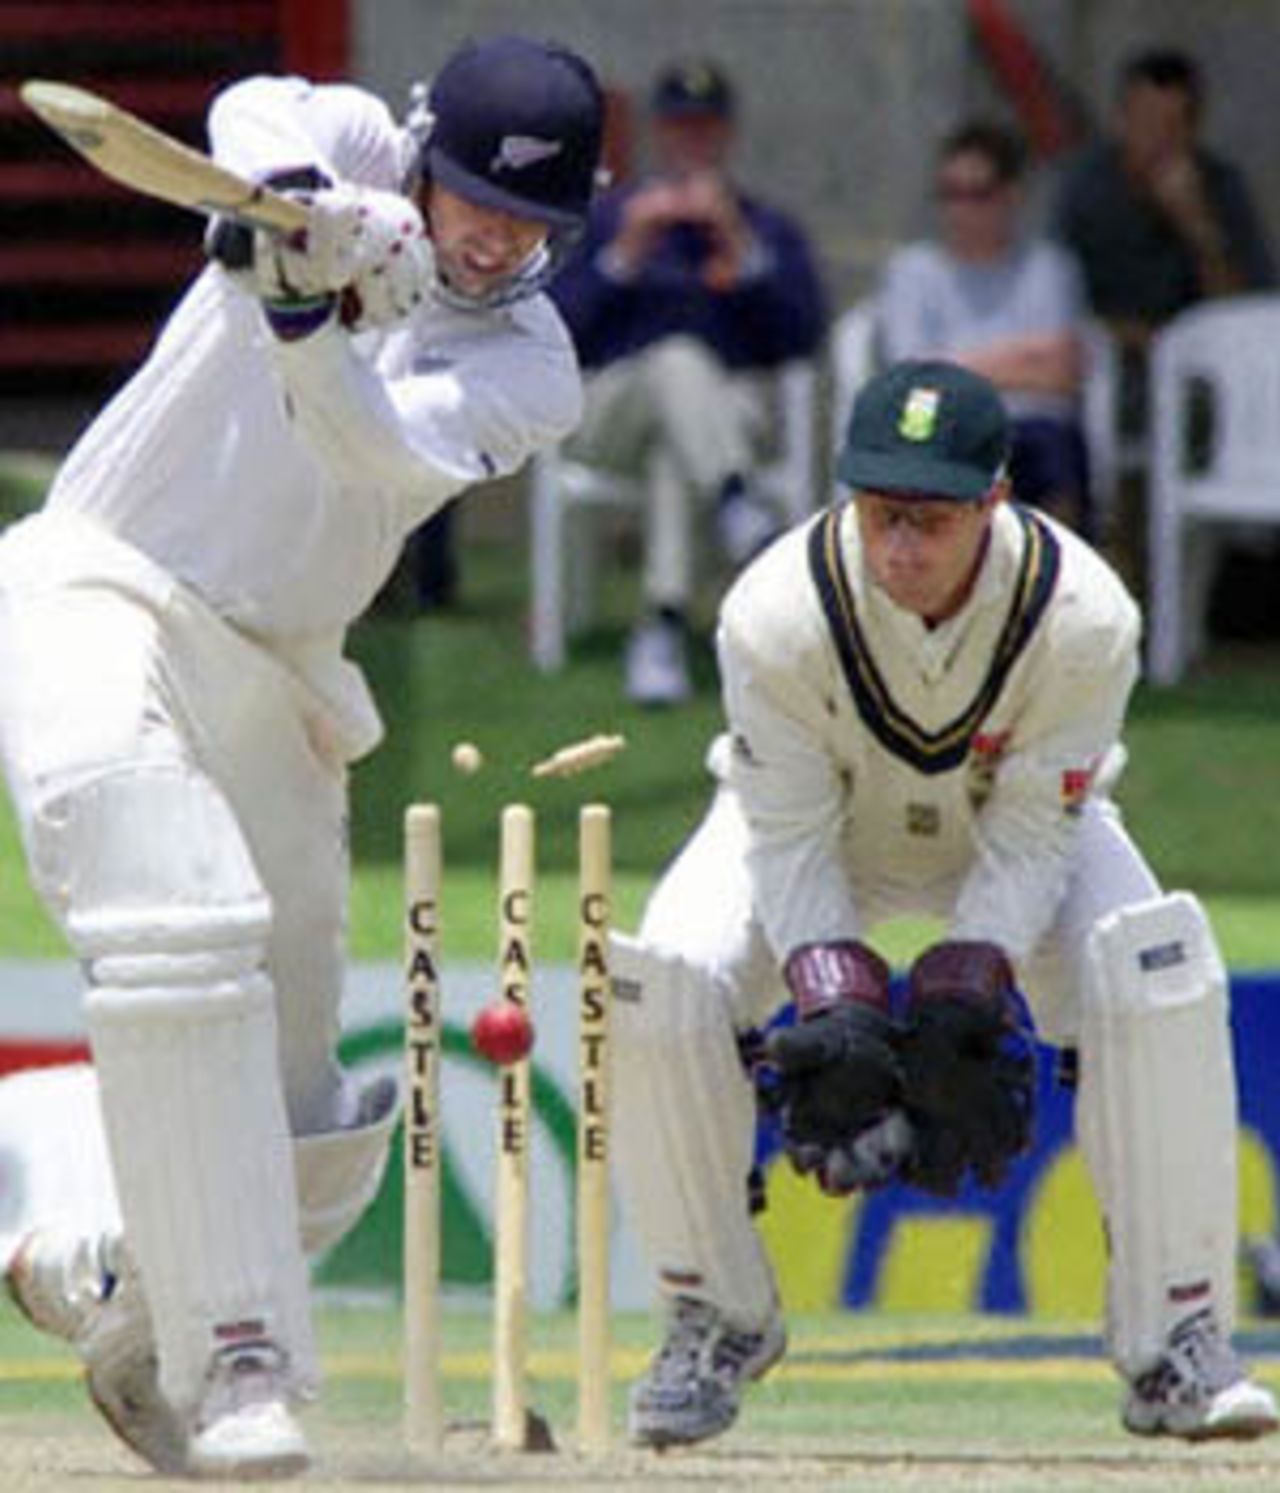 Fleming loses his defences to Boje as keeper Boucher looks on, New Zealand in South Africa, 2000/01, 1st Test, South Africa v New Zealand, Goodyear Park, Bloemfontein, 17-21 November 2000 (Day 3).